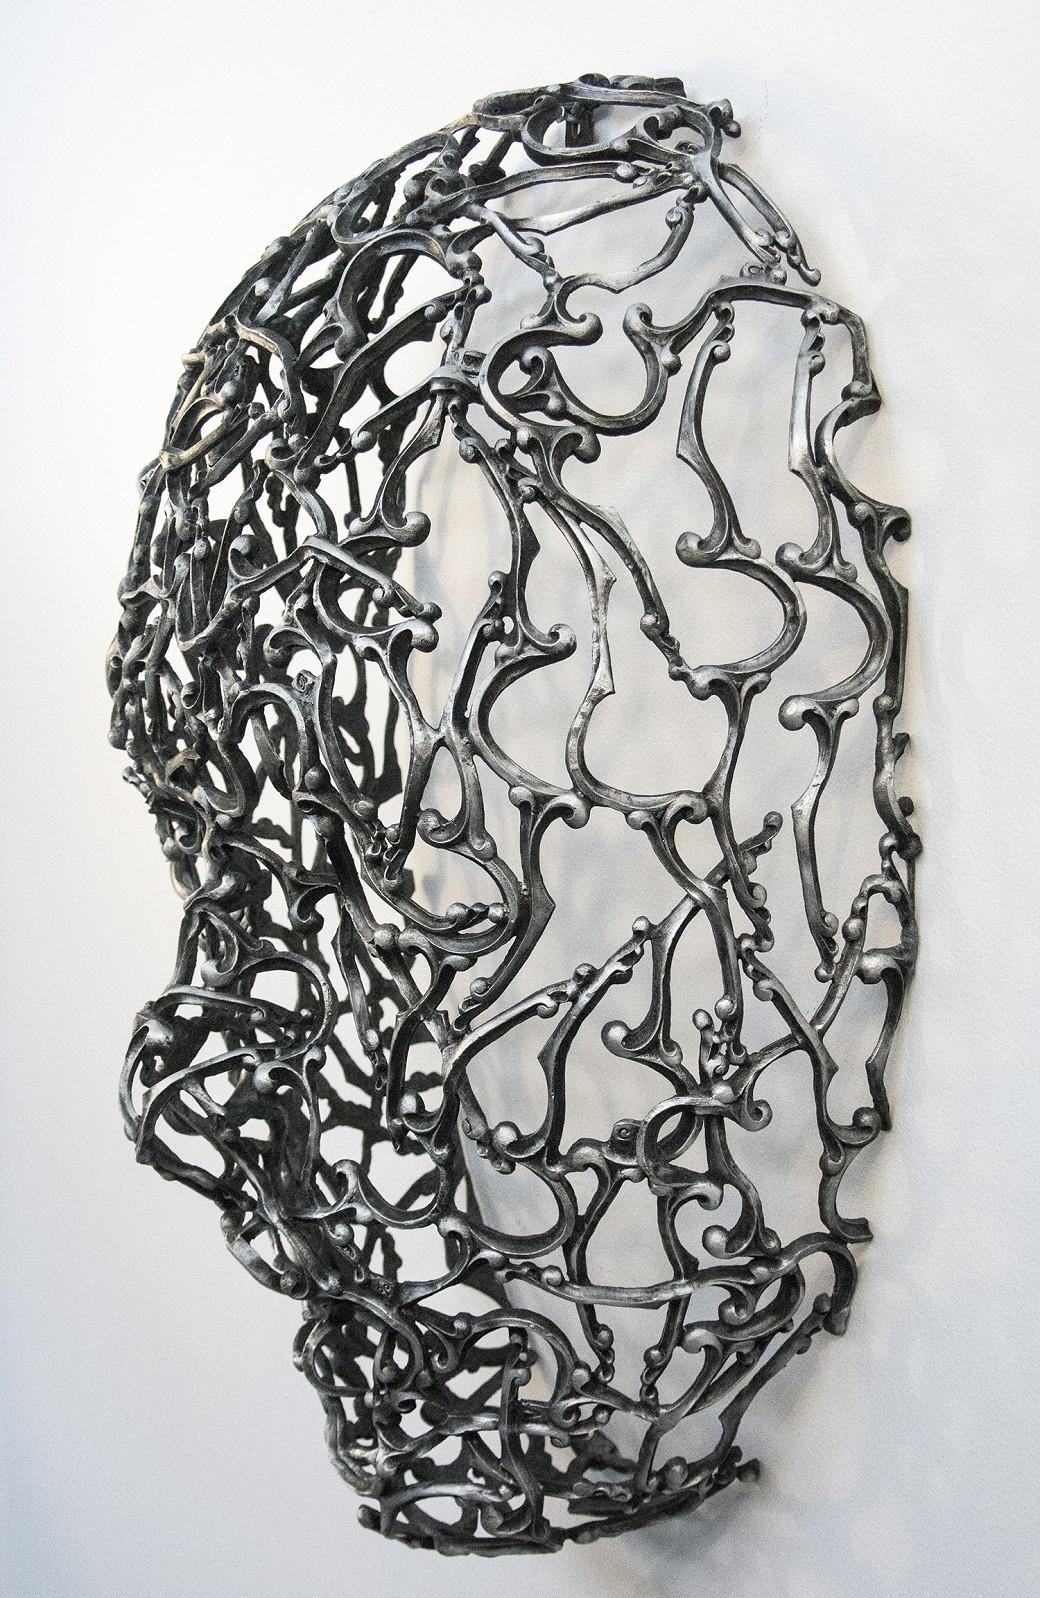 Snakes & Letters - repurposed metal, gothic, aluminum figurative wall sculpture - Beige Abstract Sculpture by Dale Dunning